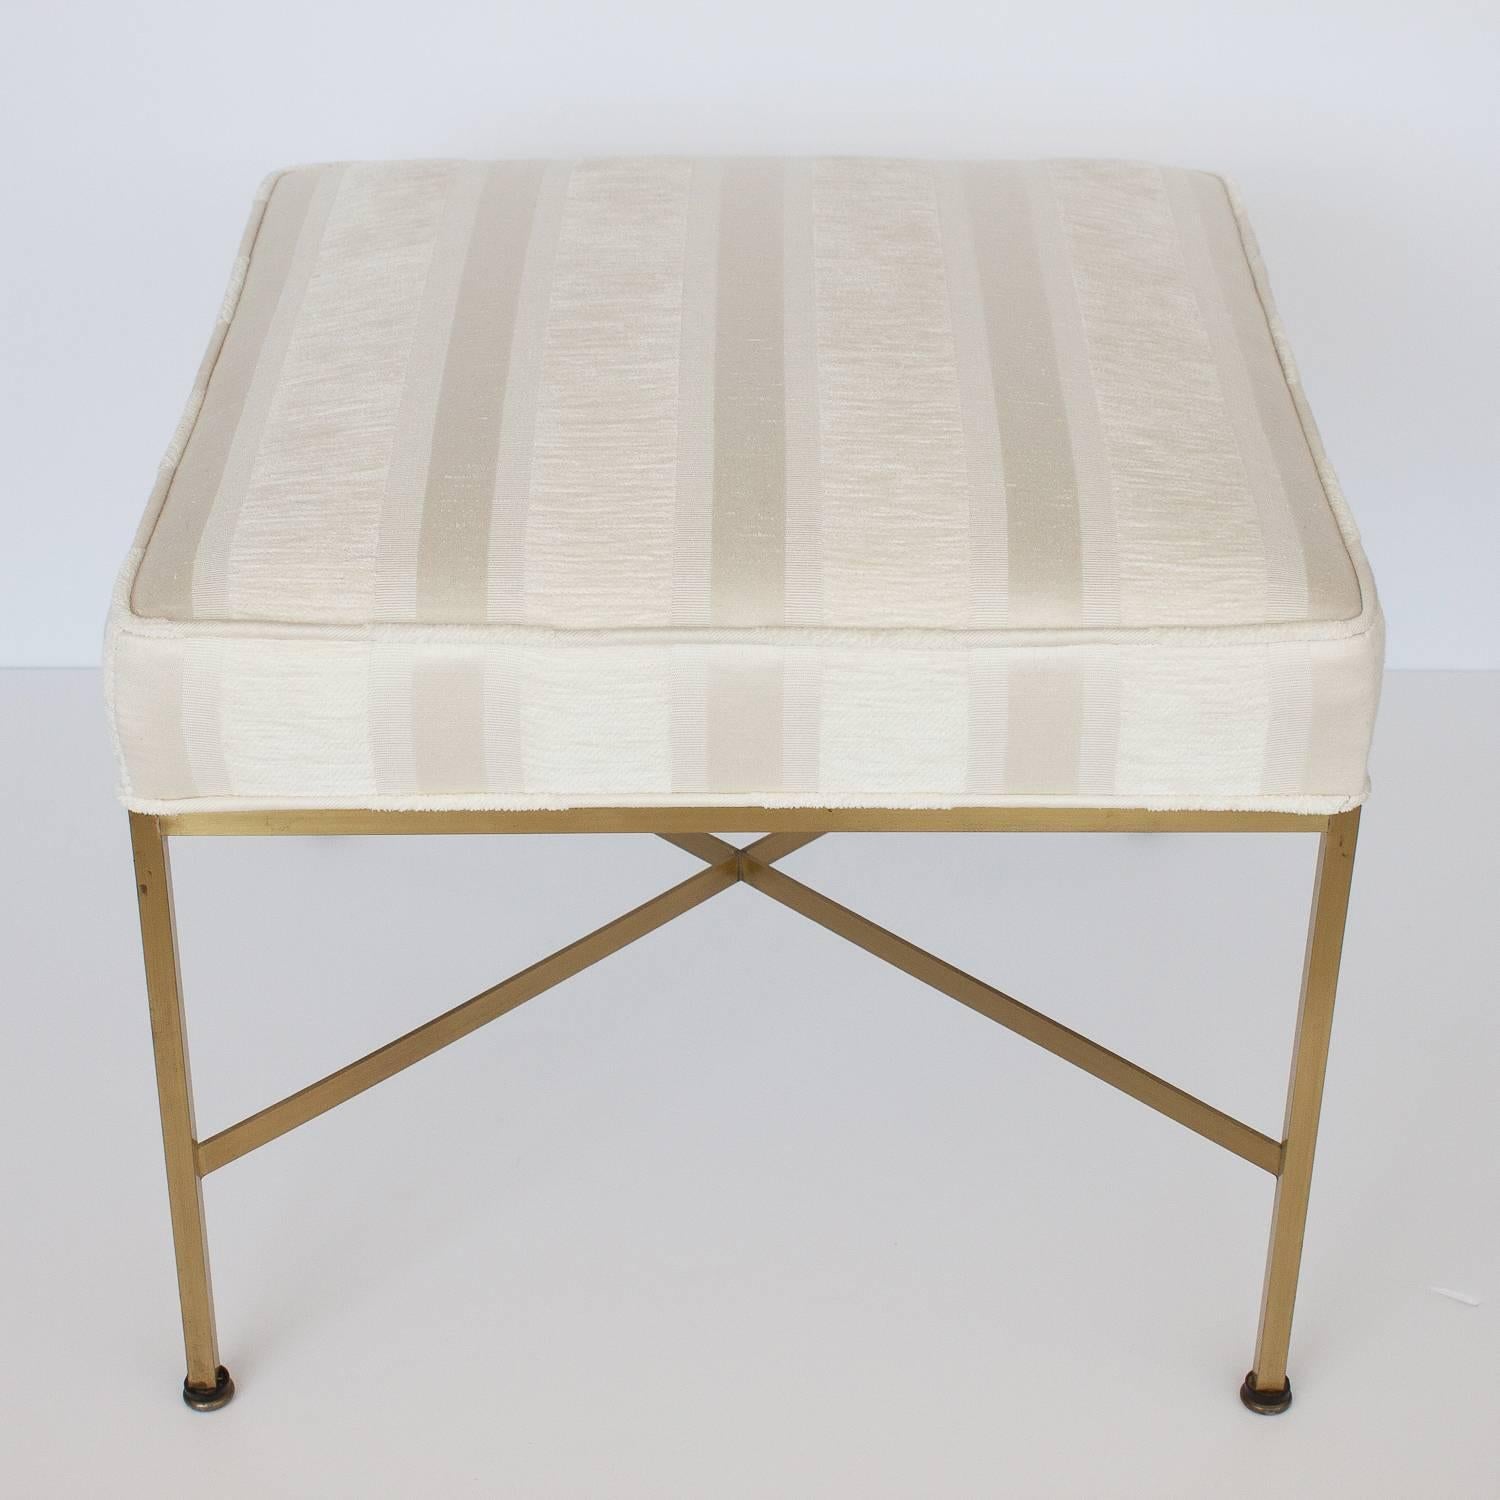 Paul McCobb ottoman / foot stool with X shaped stretchers in brass. Square upholstered seats supported by a slim brass frame. Ivory chenille and sateen stripe fabric. General patina to brass finish.

